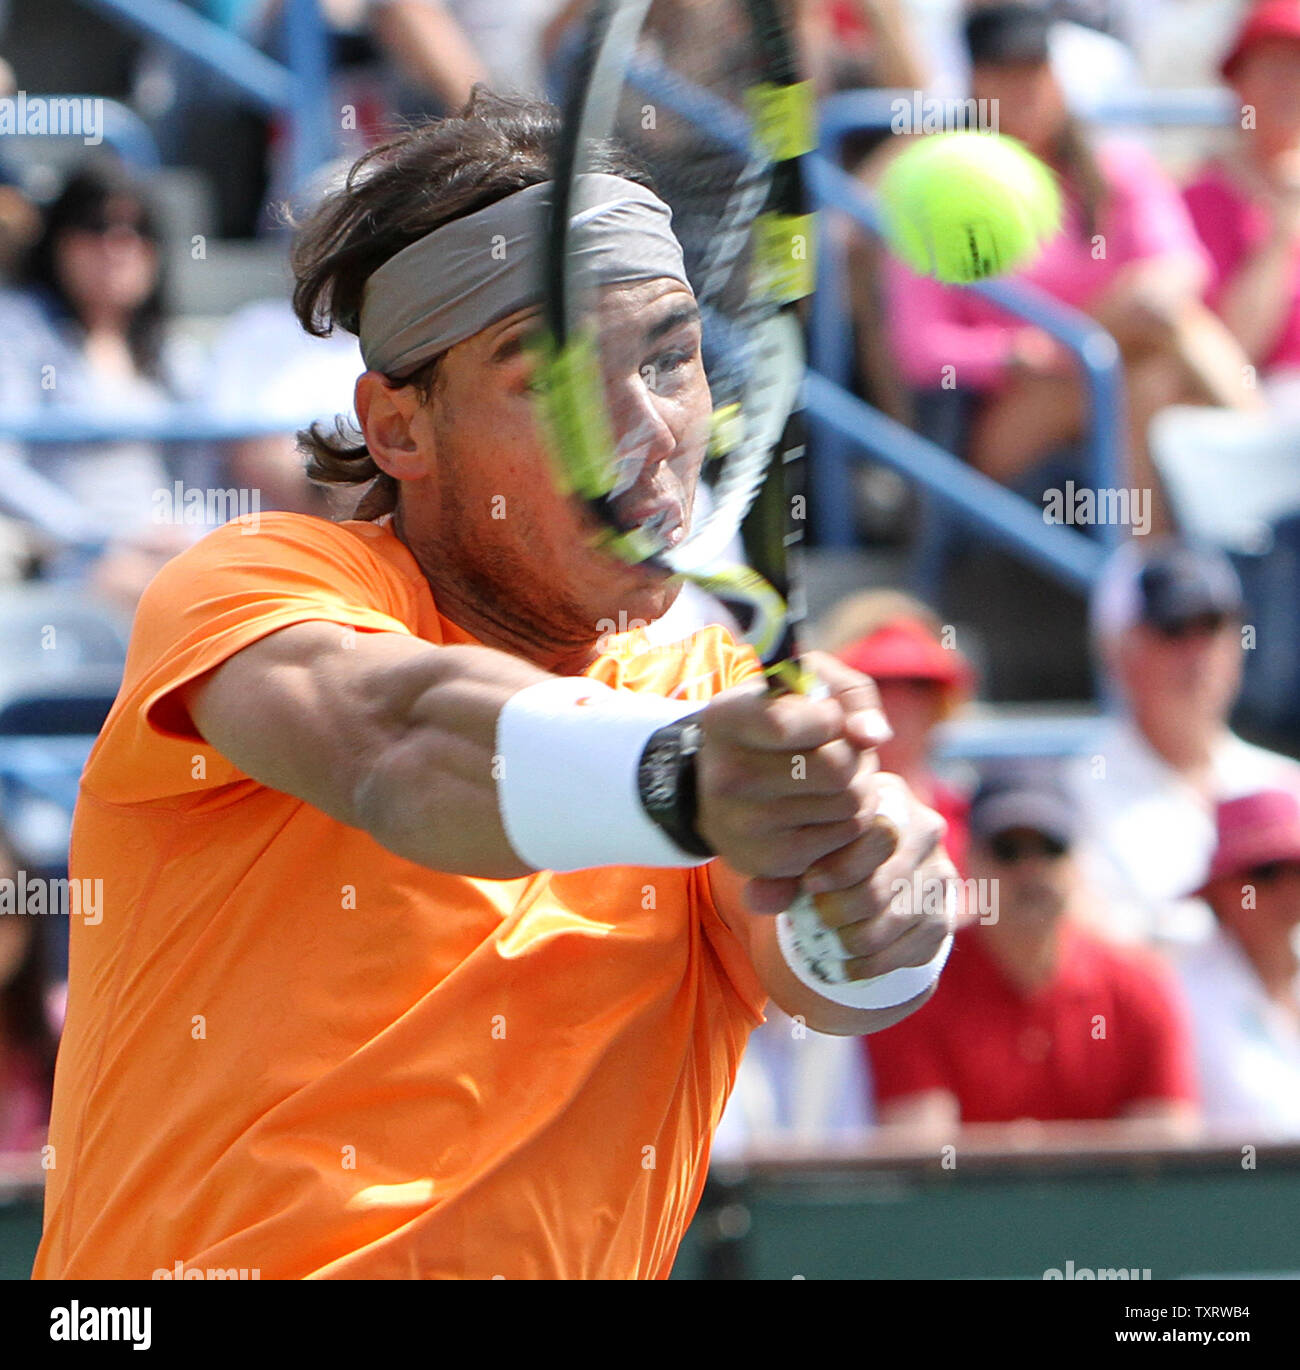 Spaniard Rafael Nadal hits a shot during his mens semi-final match against Argentine Juan Martin Del Potro at the BNP Paribas Open in Indian Wells, California on March 19, 2011.  Nadal defeated Del Potro 6-4, 6-4 to advance to the tournament final.   UPI/David Silpa Stock Photo